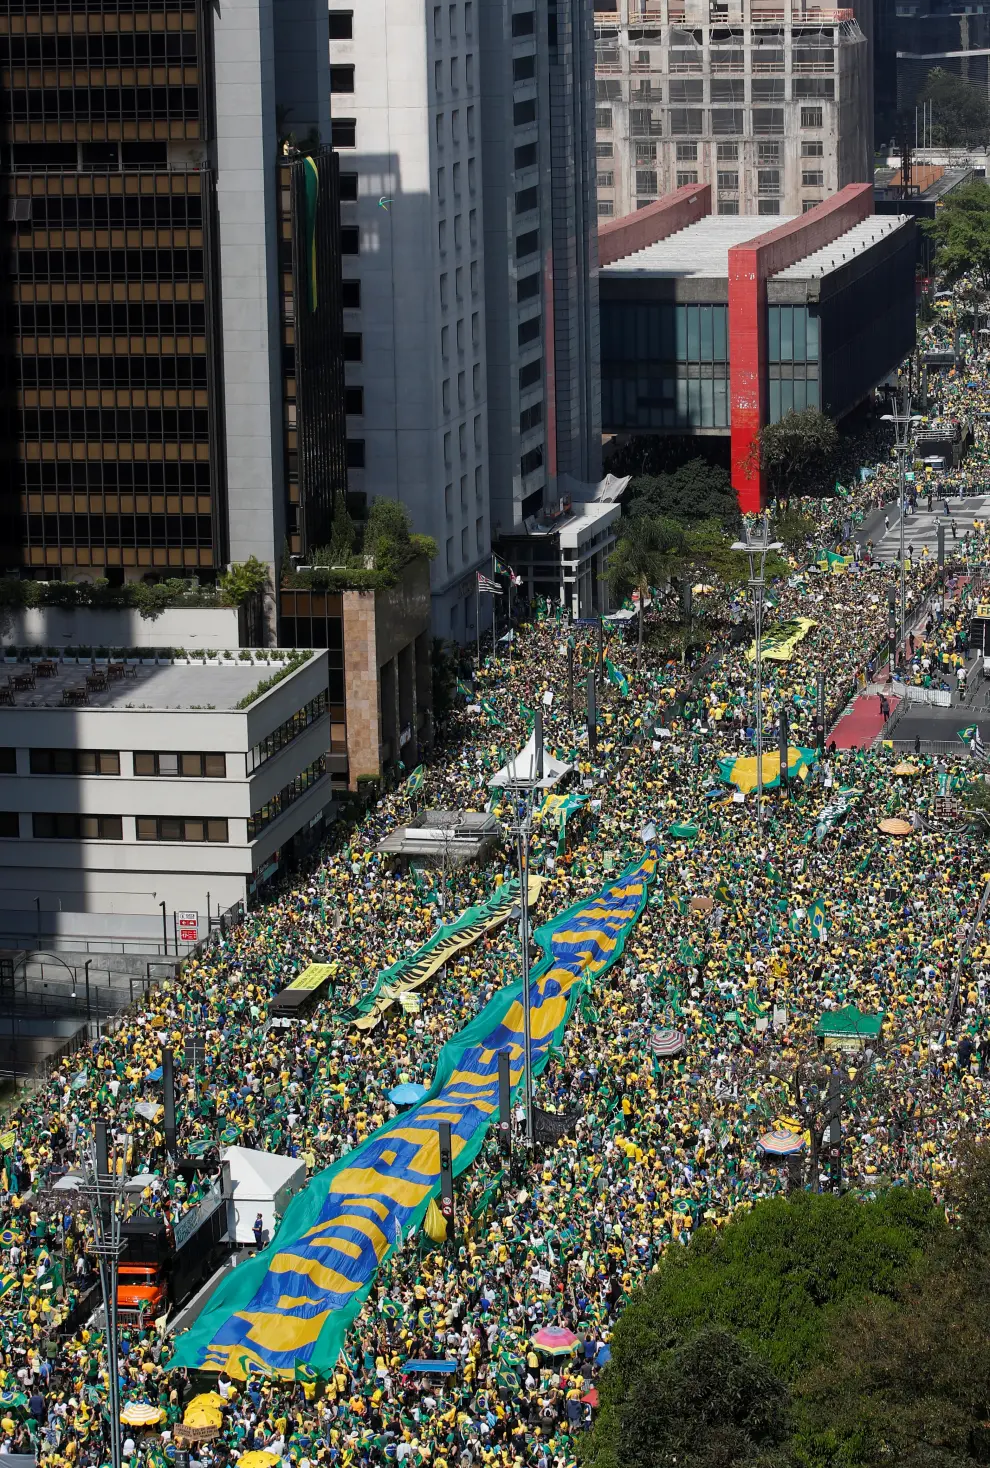 Supporters of Brazilian President Bolsonaro gather to back the far-right leader in his dispute with the Supreme Court, in Sao Paulo